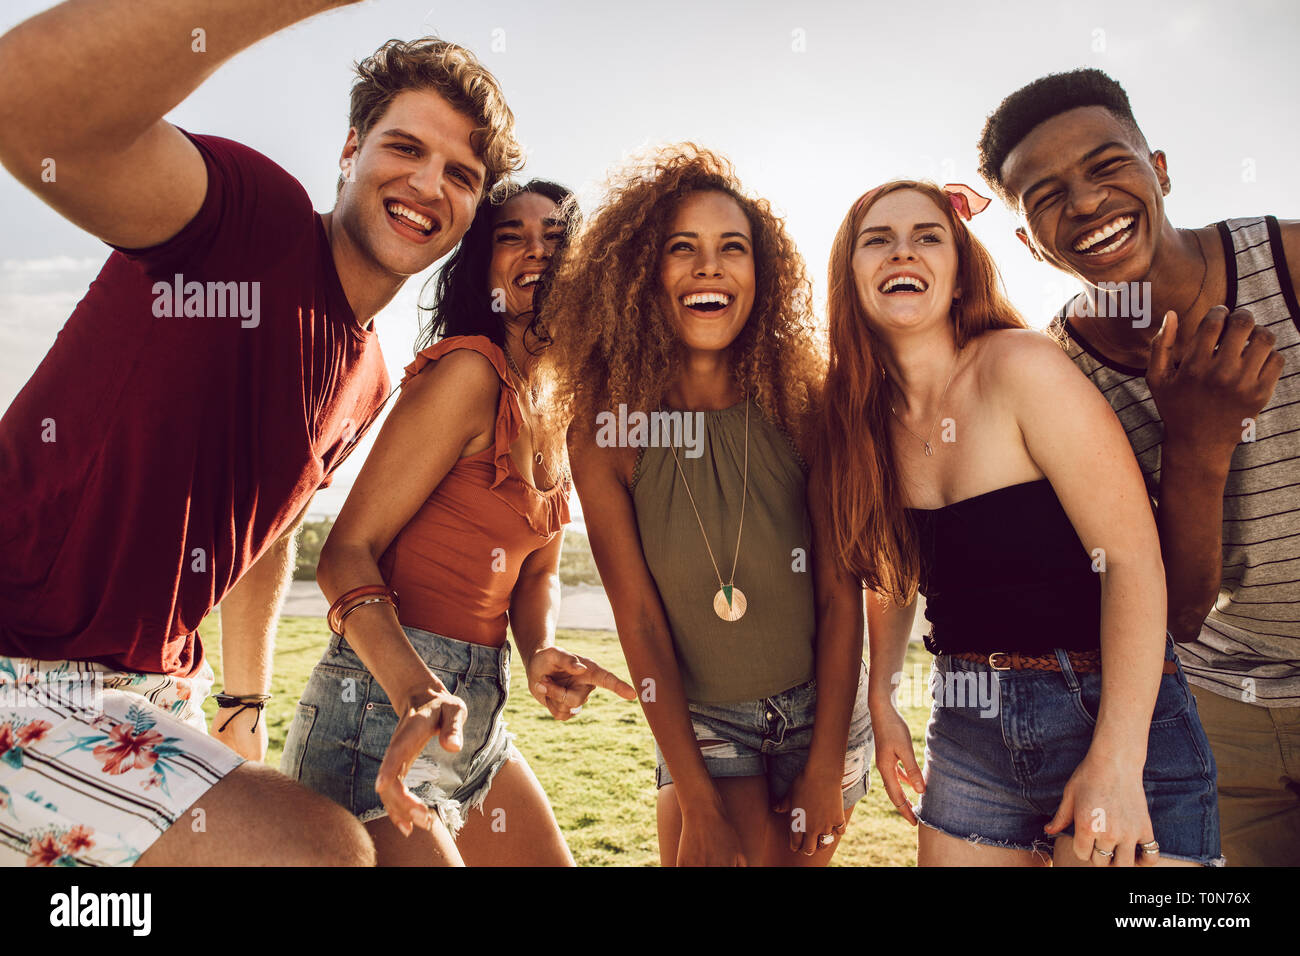 Multi-ethnic group of friends together having fun. Happy young people dancing outdoors. Group of friends enjoying summer vacation. Stock Photo